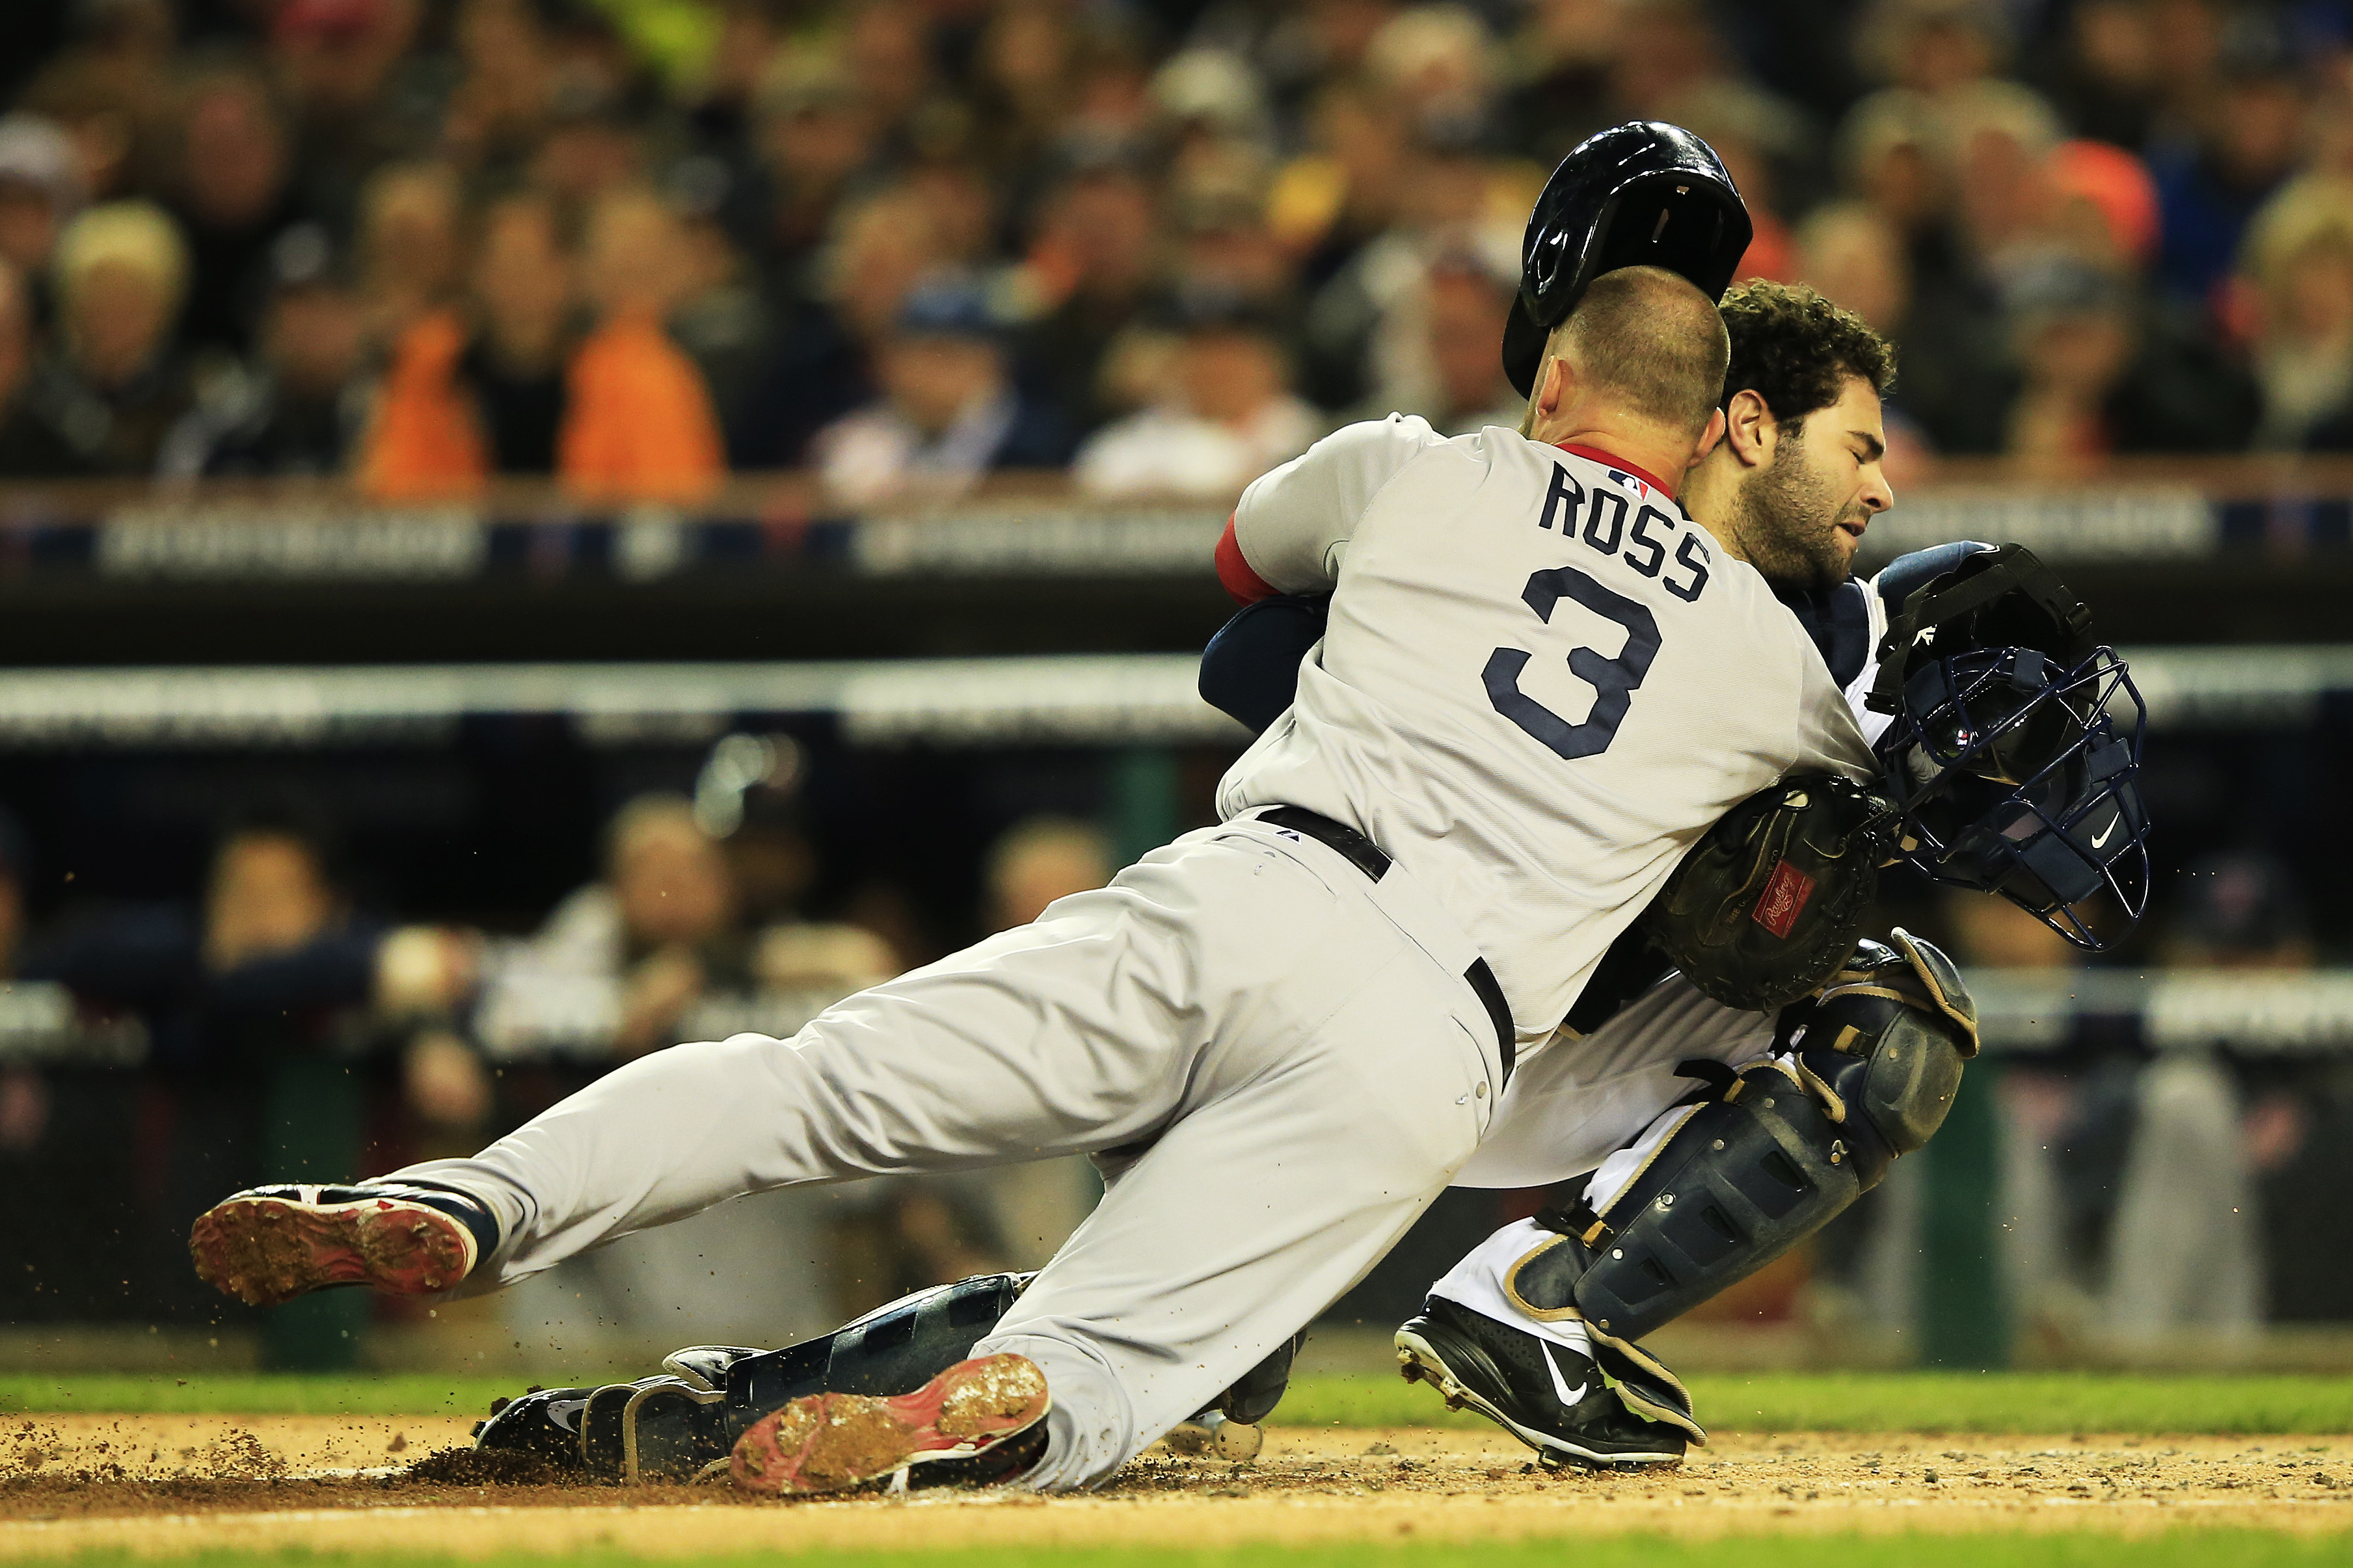 Red Sox catcher David Ross collides with Tigers catcher Alex Avila at home plate during ALCS Game 5. (Photo by Jamie Squire/Getty Images)